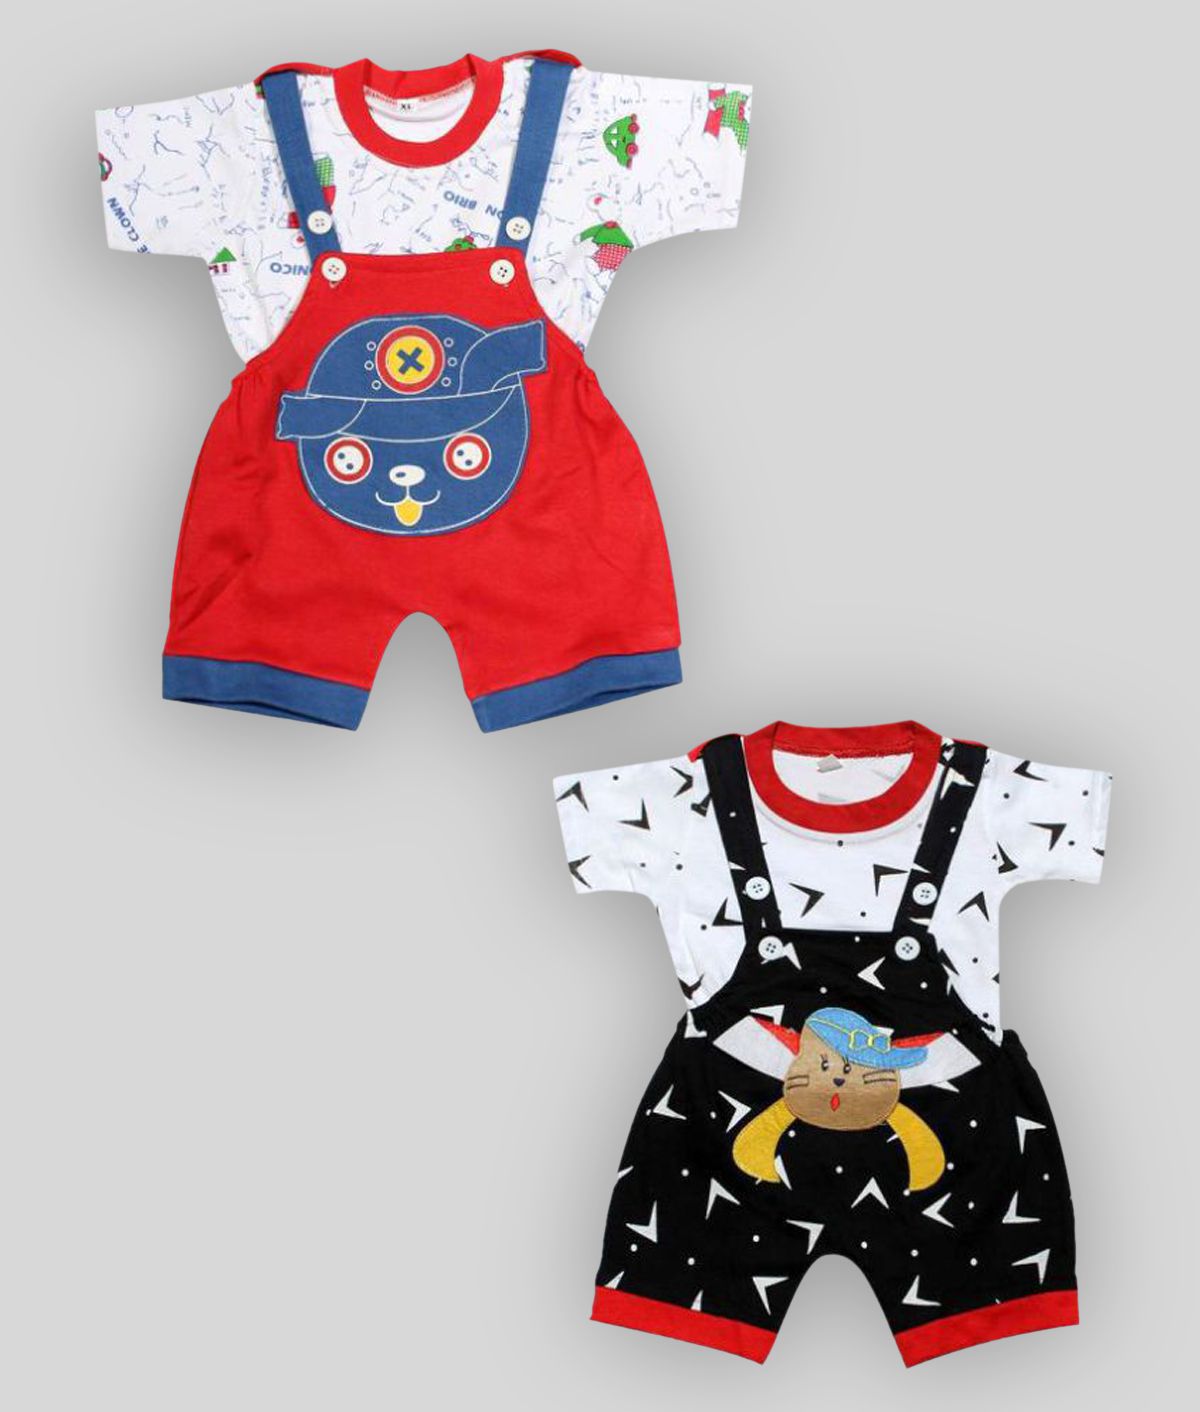     			babeezworld dungaree for Boys & Girls casual printed pure cotton-Pack of 2 (9101990001201; Multi Colour)